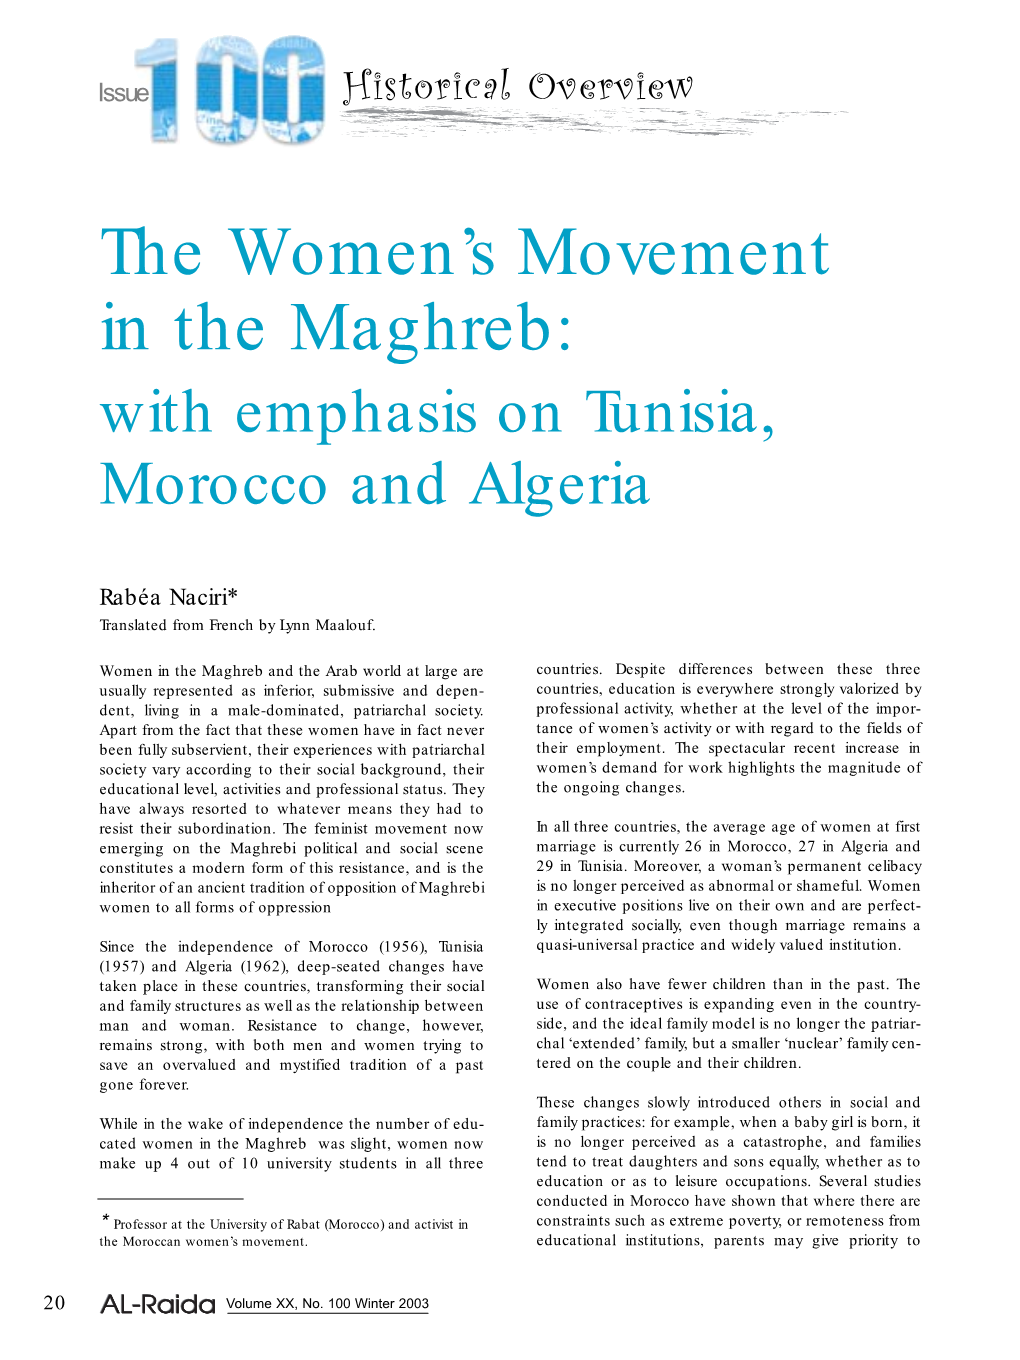 The Women's Movement in the Maghreb